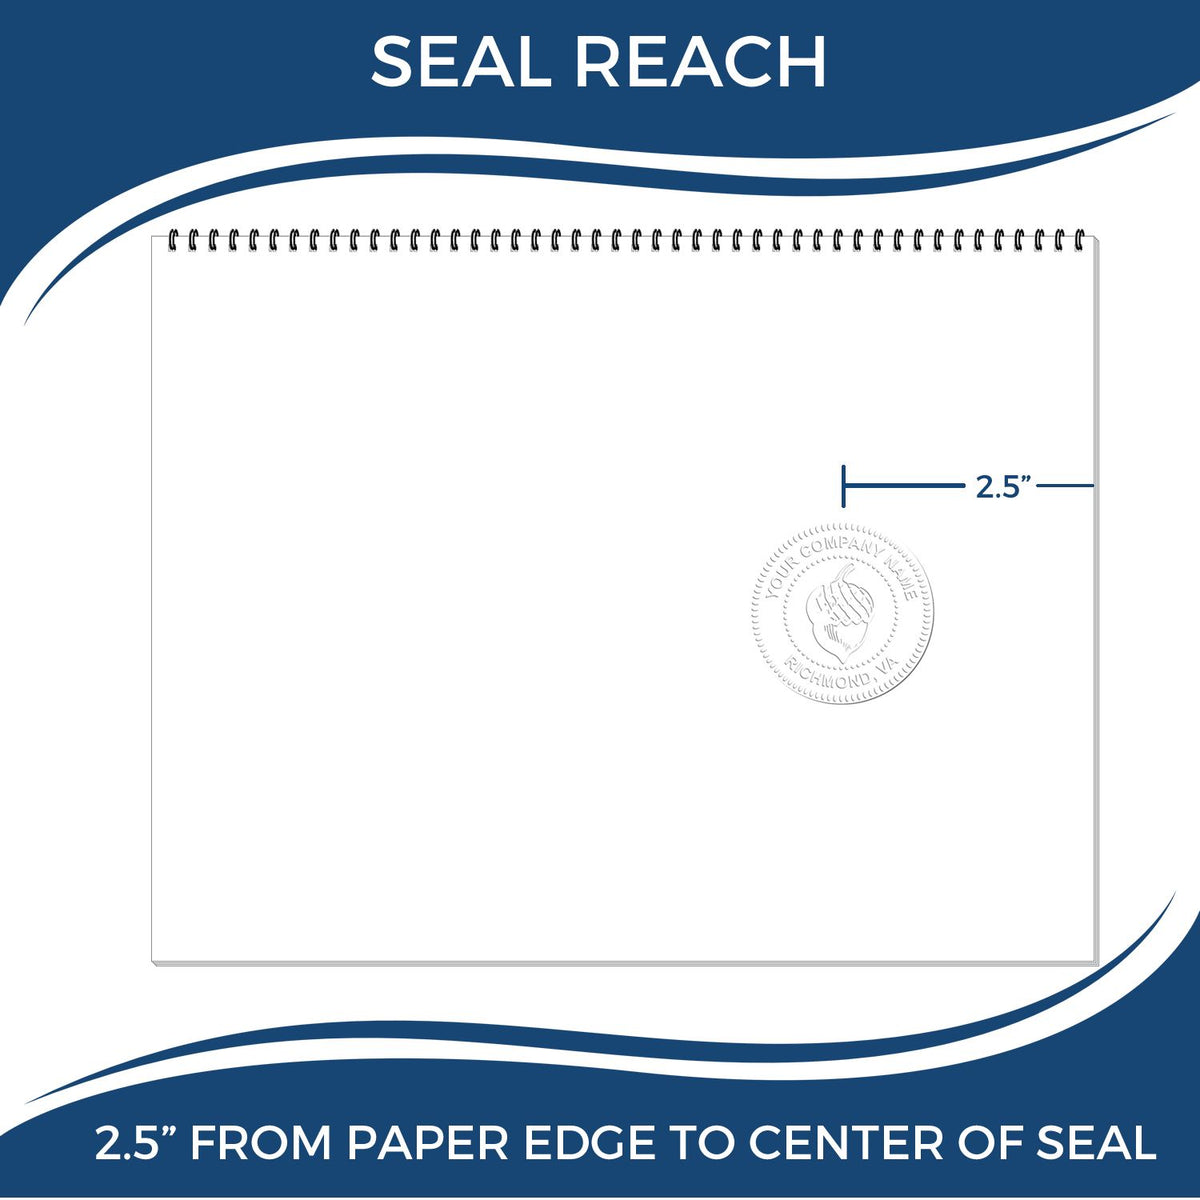 An infographic showing the seal reach which is represented by a ruler and a miniature seal image of the Long Reach Colorado Land Surveyor Seal